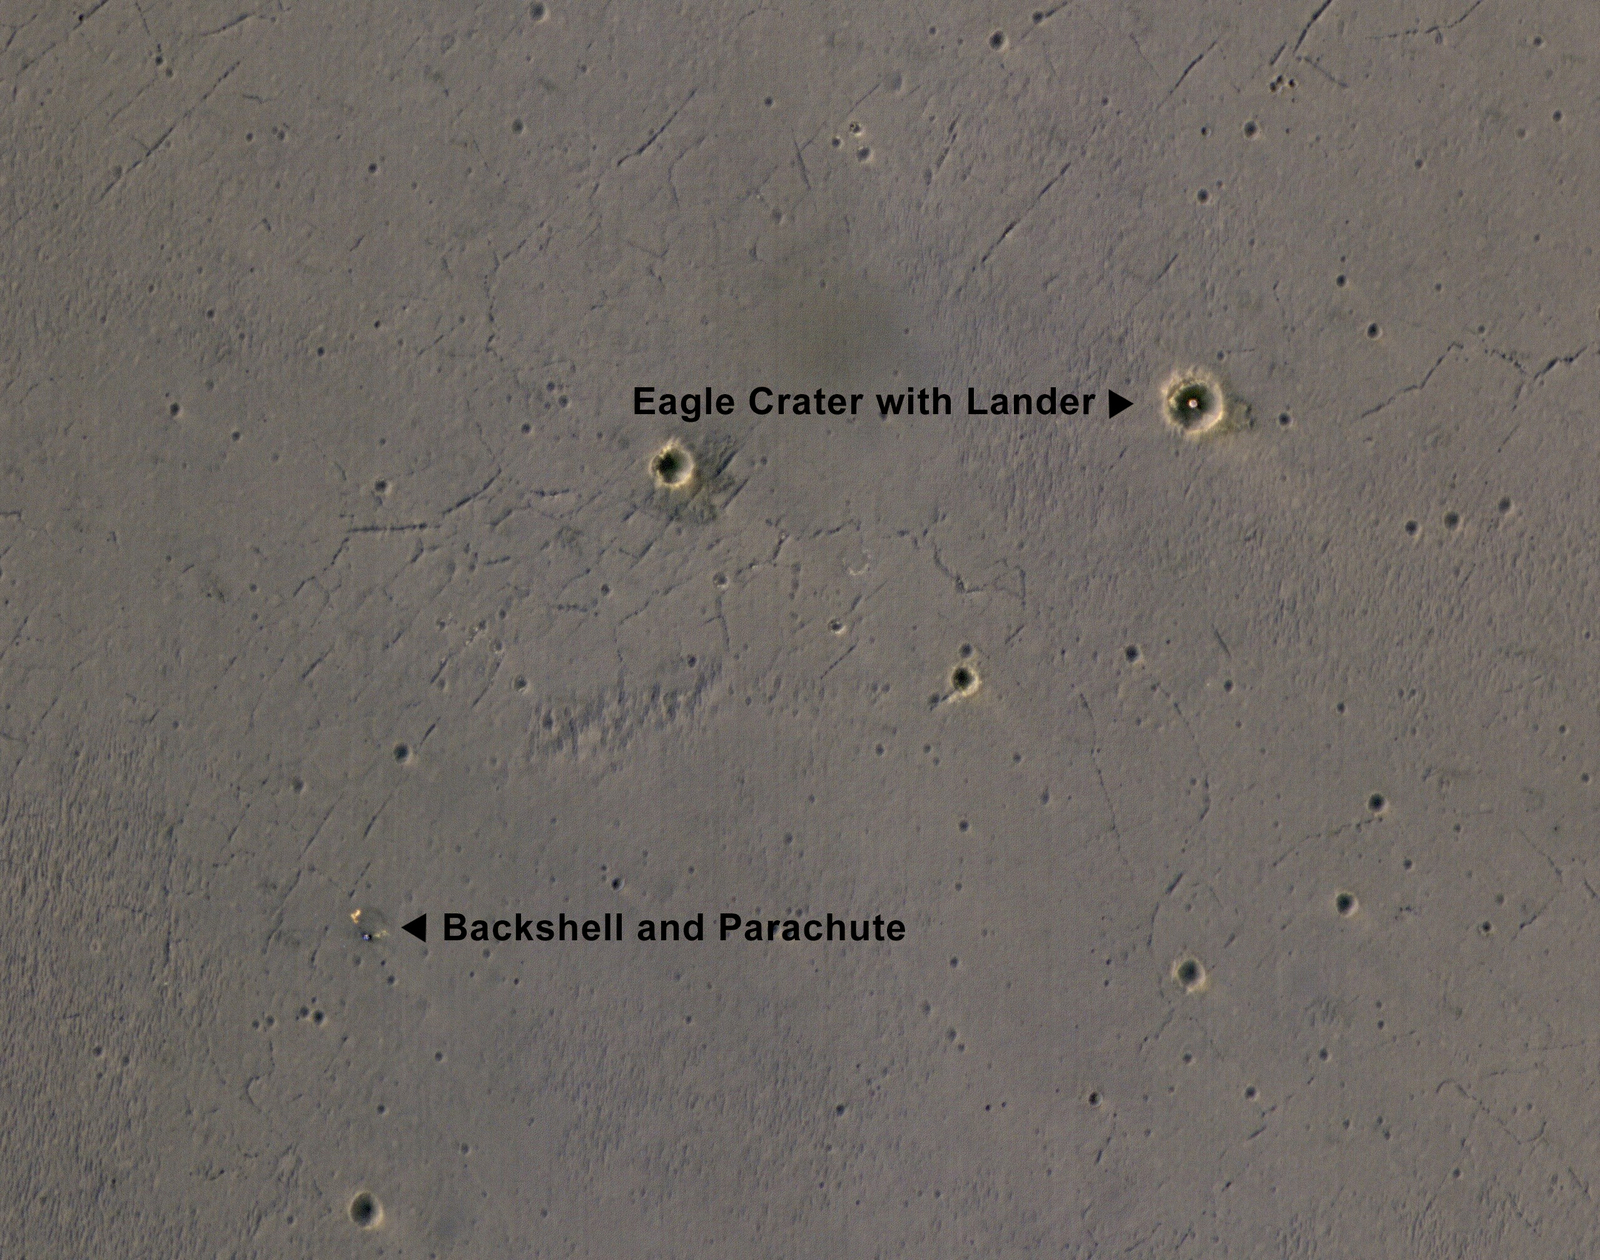 Rover's Landing Hardware at Eagle Crater, Mars (Annotated)